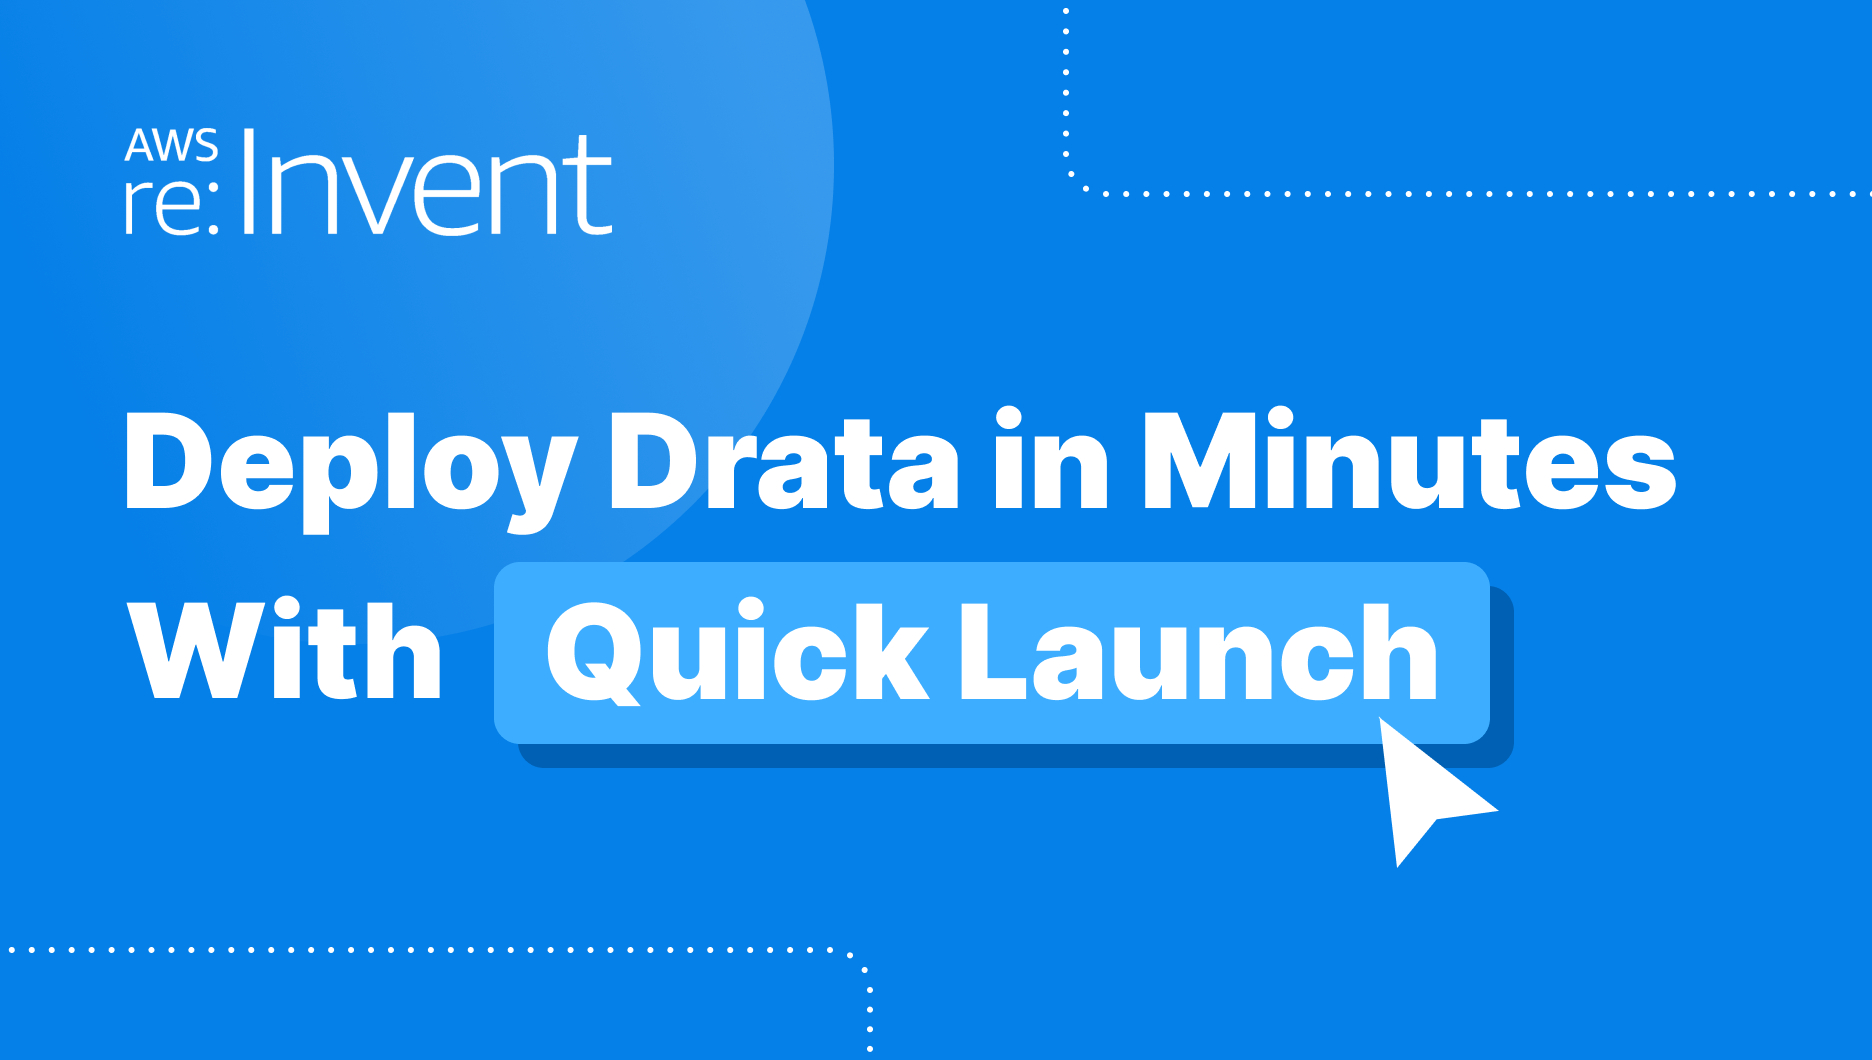 Deploy Drata in Minutes With Quick Launch